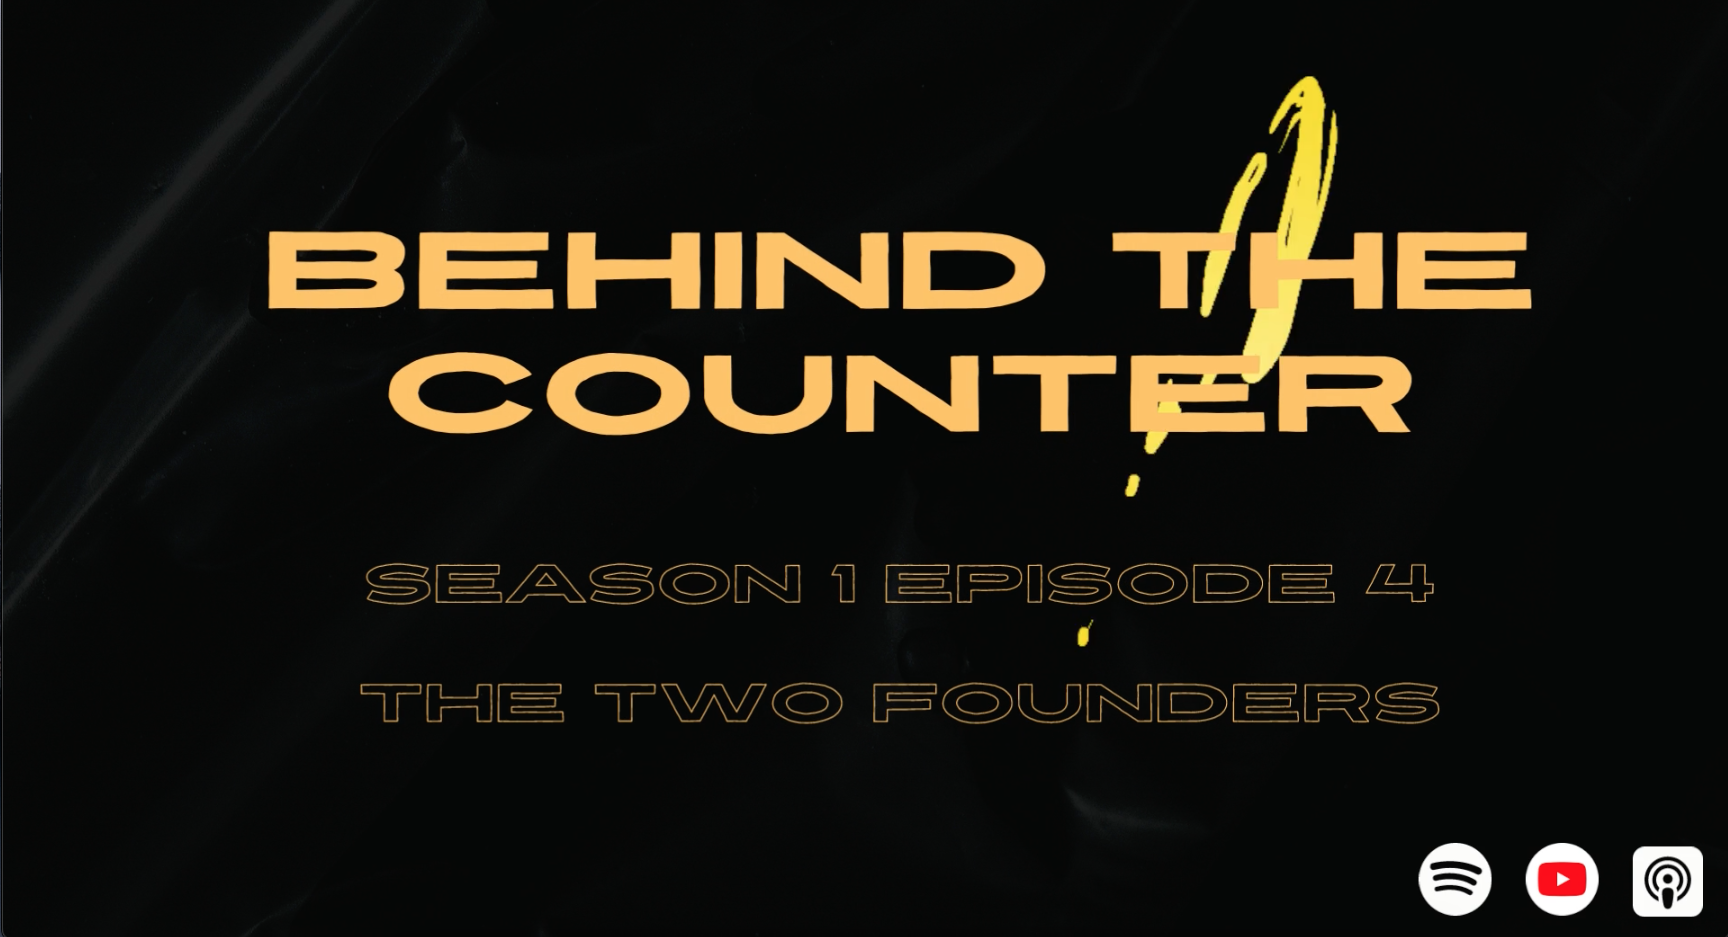 S1 E4: Teh Two Founders